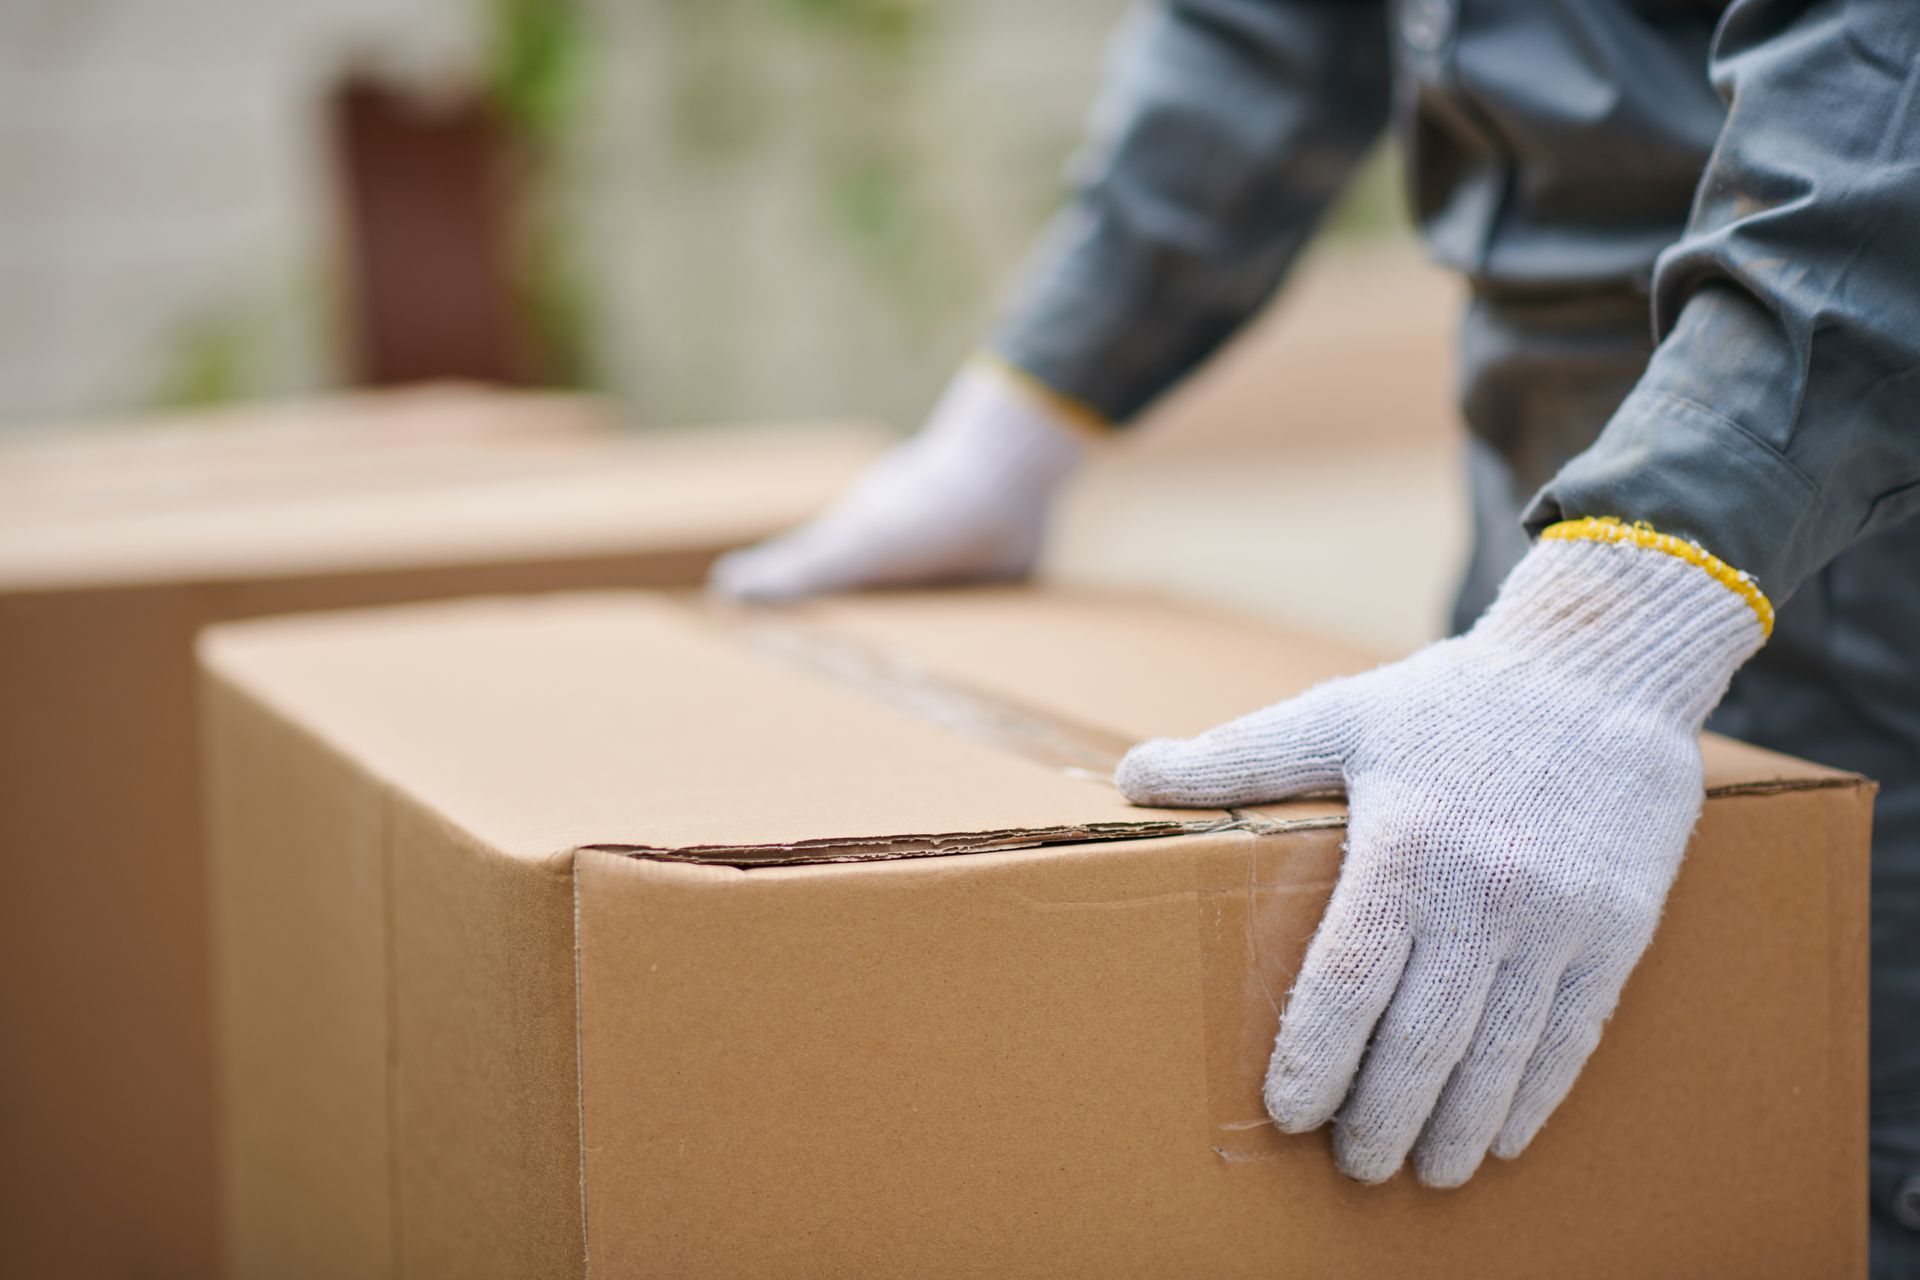 A person wearing white gloves is holding a cardboard box.